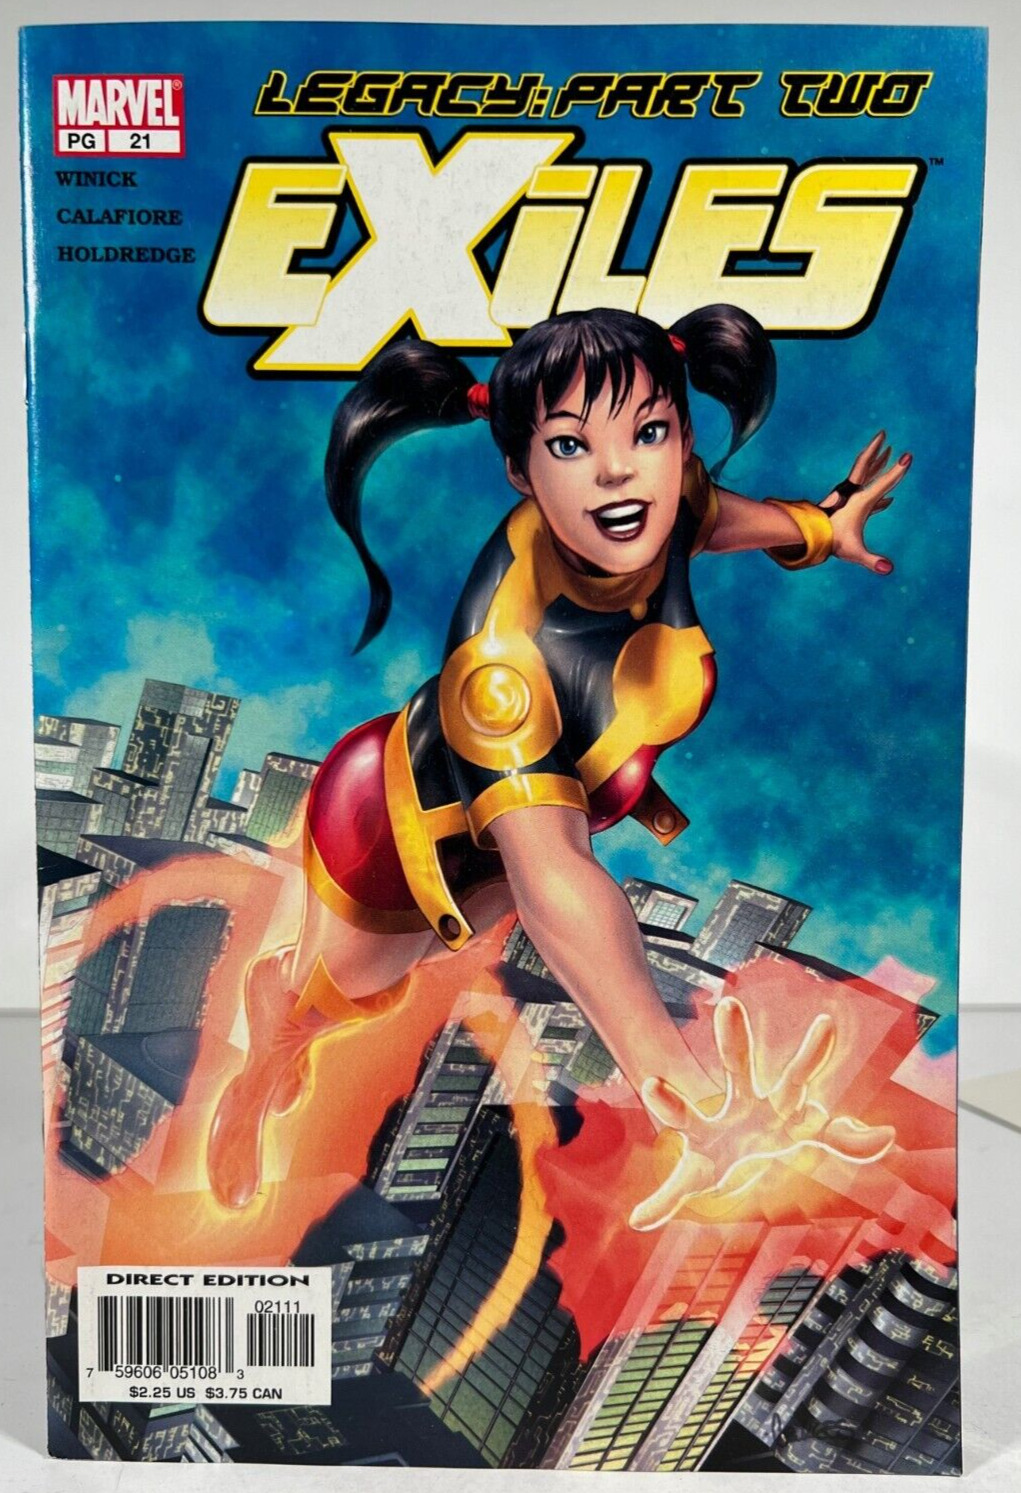 EXILES Legacy: Part Two Vol.1 #21 March 2003  Marvel Comics